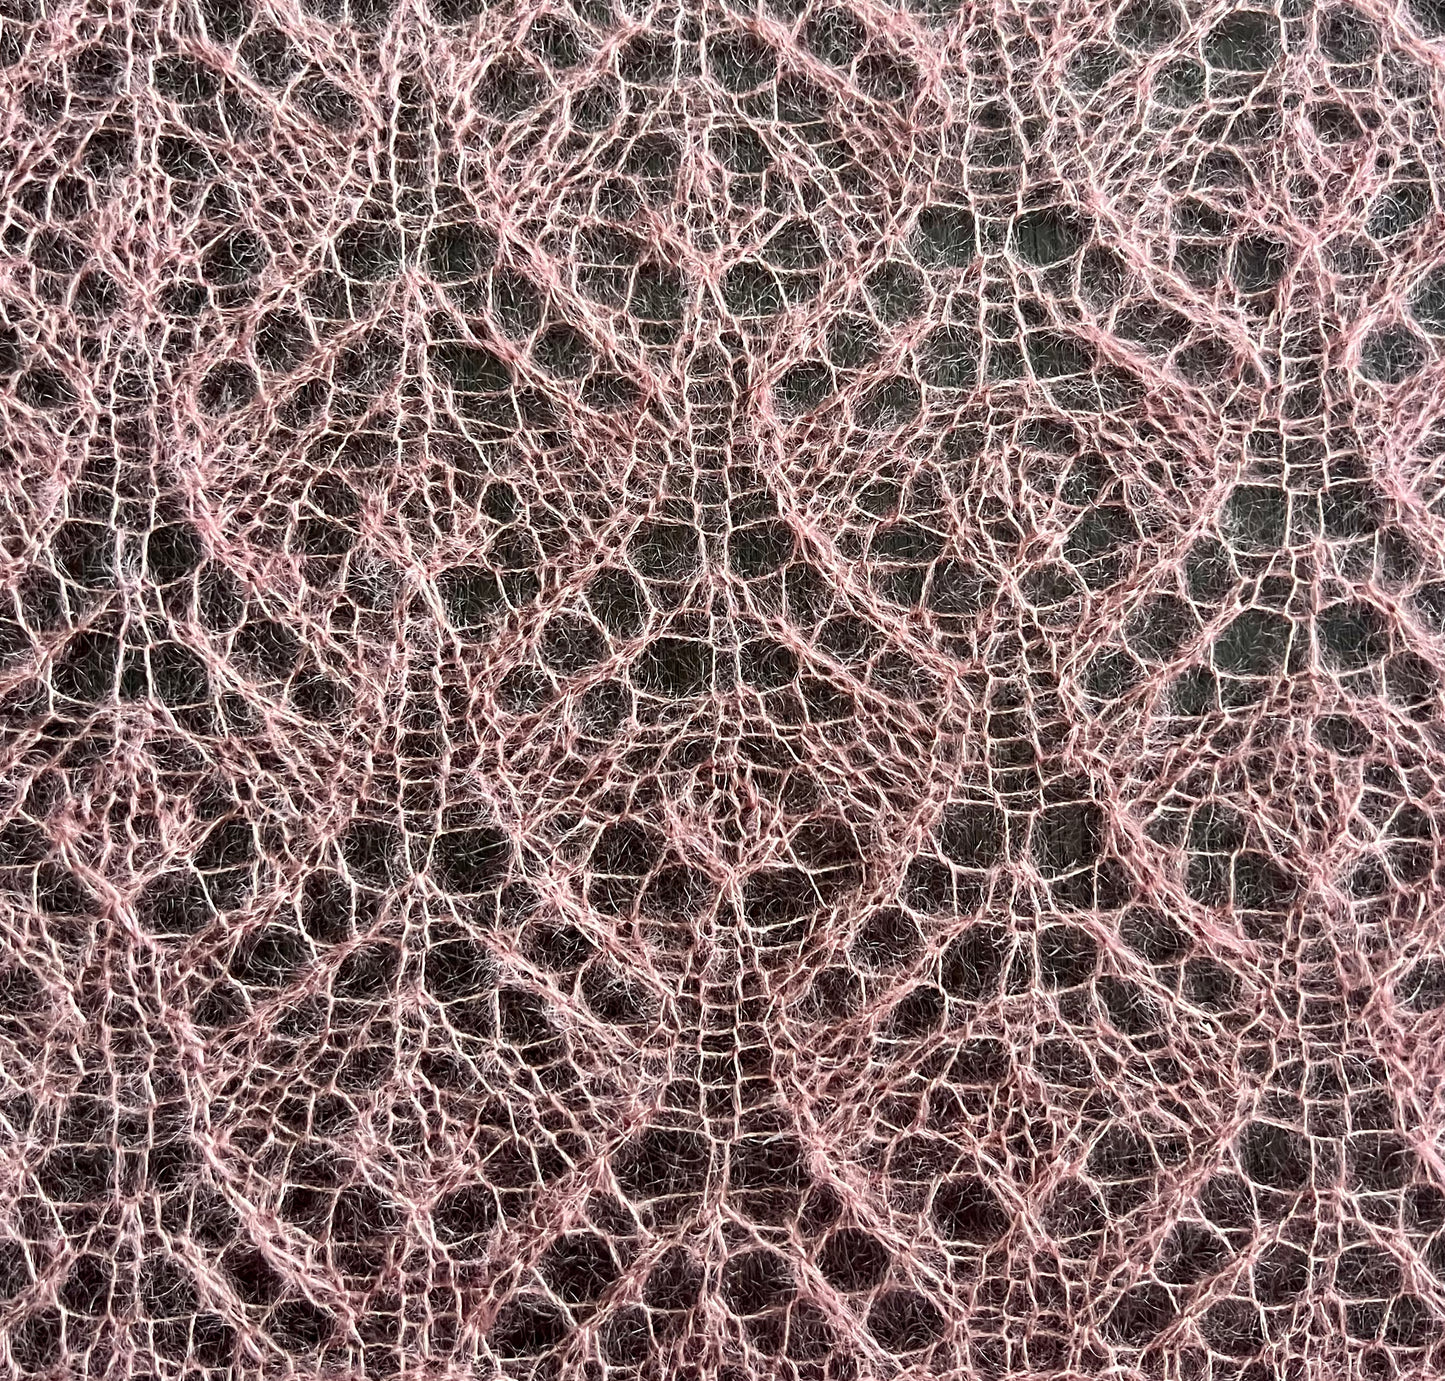 Old Pink lace shawl